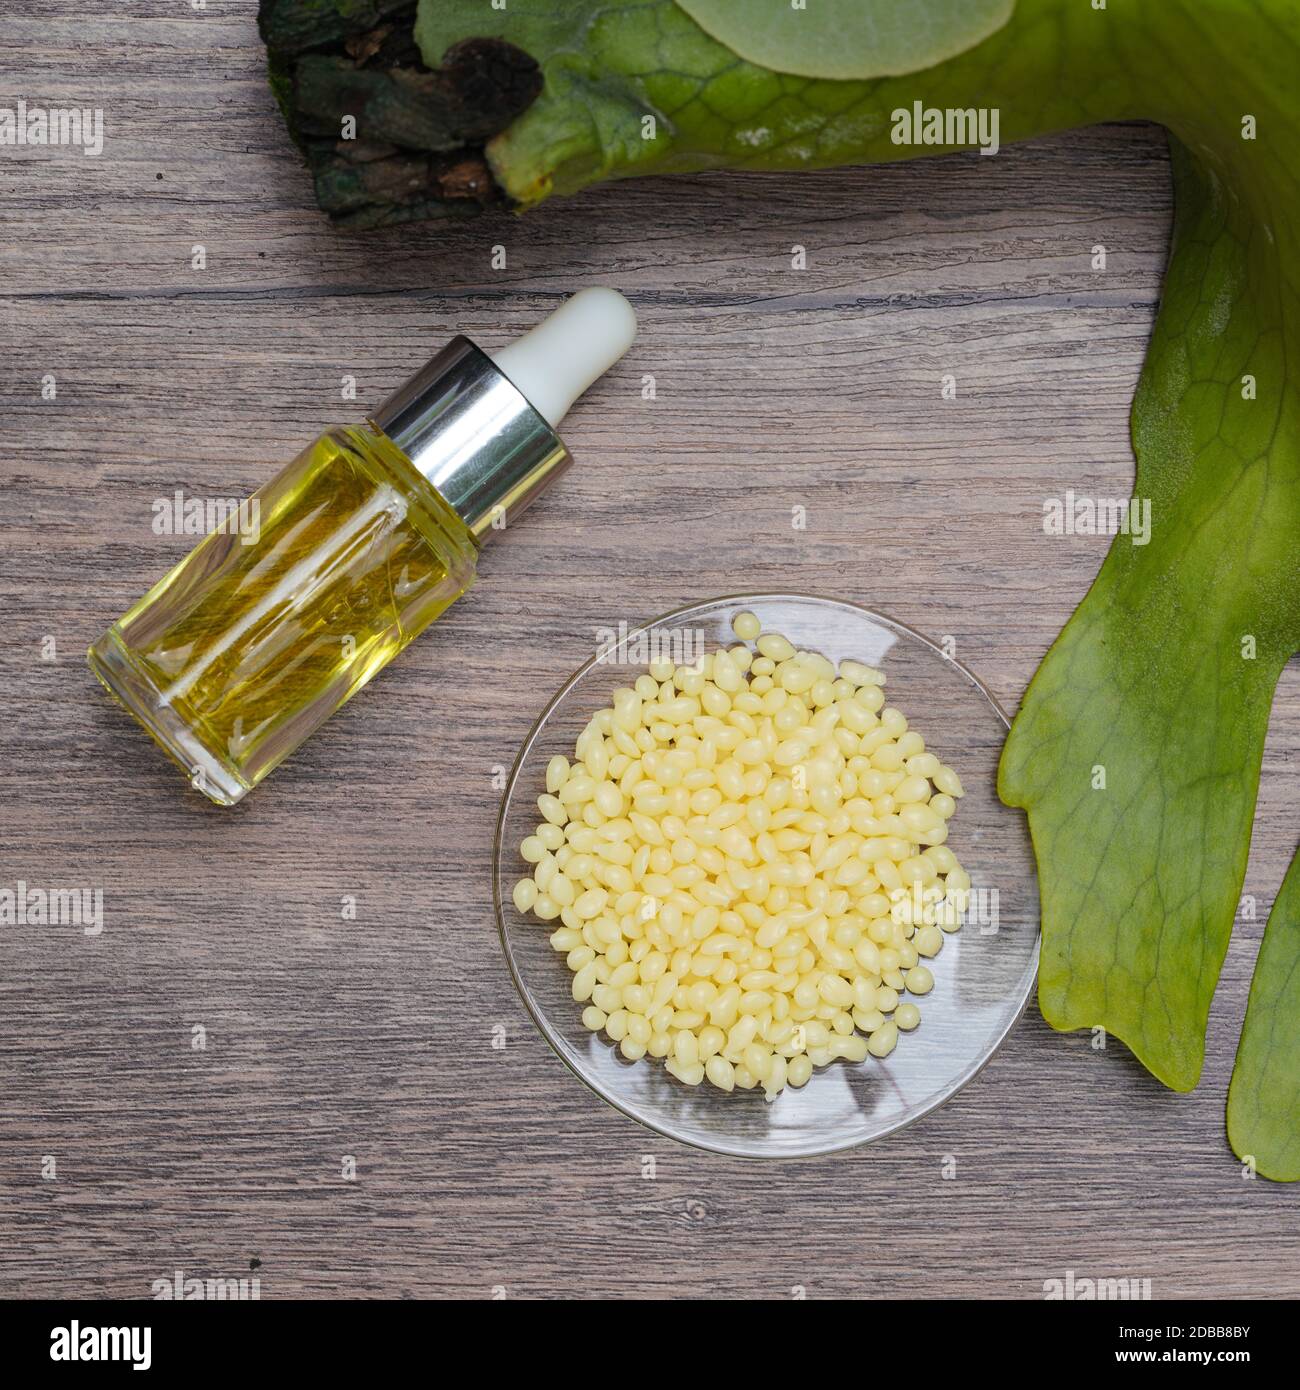 Candelilla Wax SP-75. Chemical ingredient for Cosmetics & Toiletries product. Stock Photo